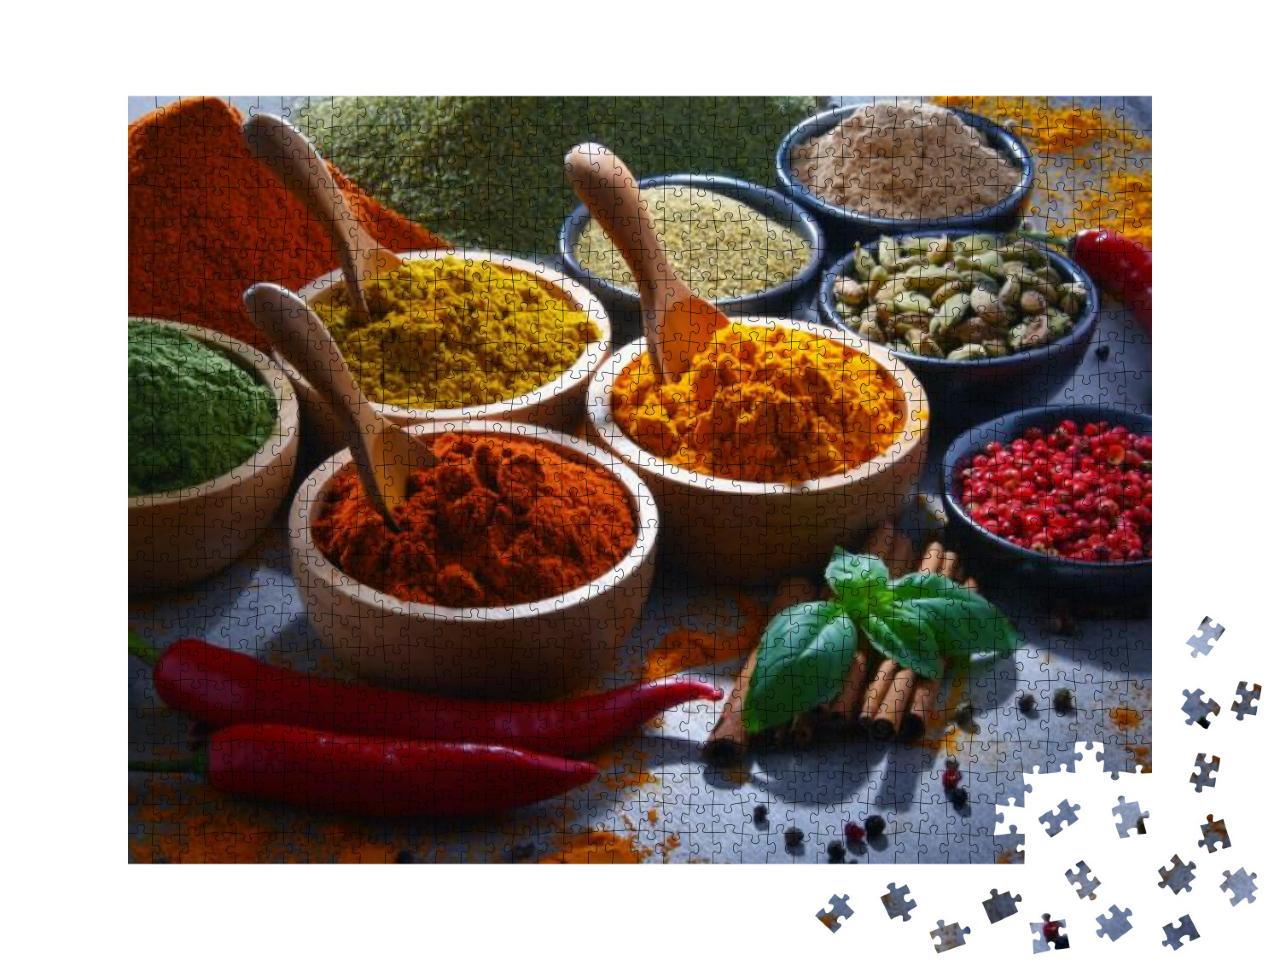 Variety of Spices on Kitchen Table... Jigsaw Puzzle with 1000 pieces